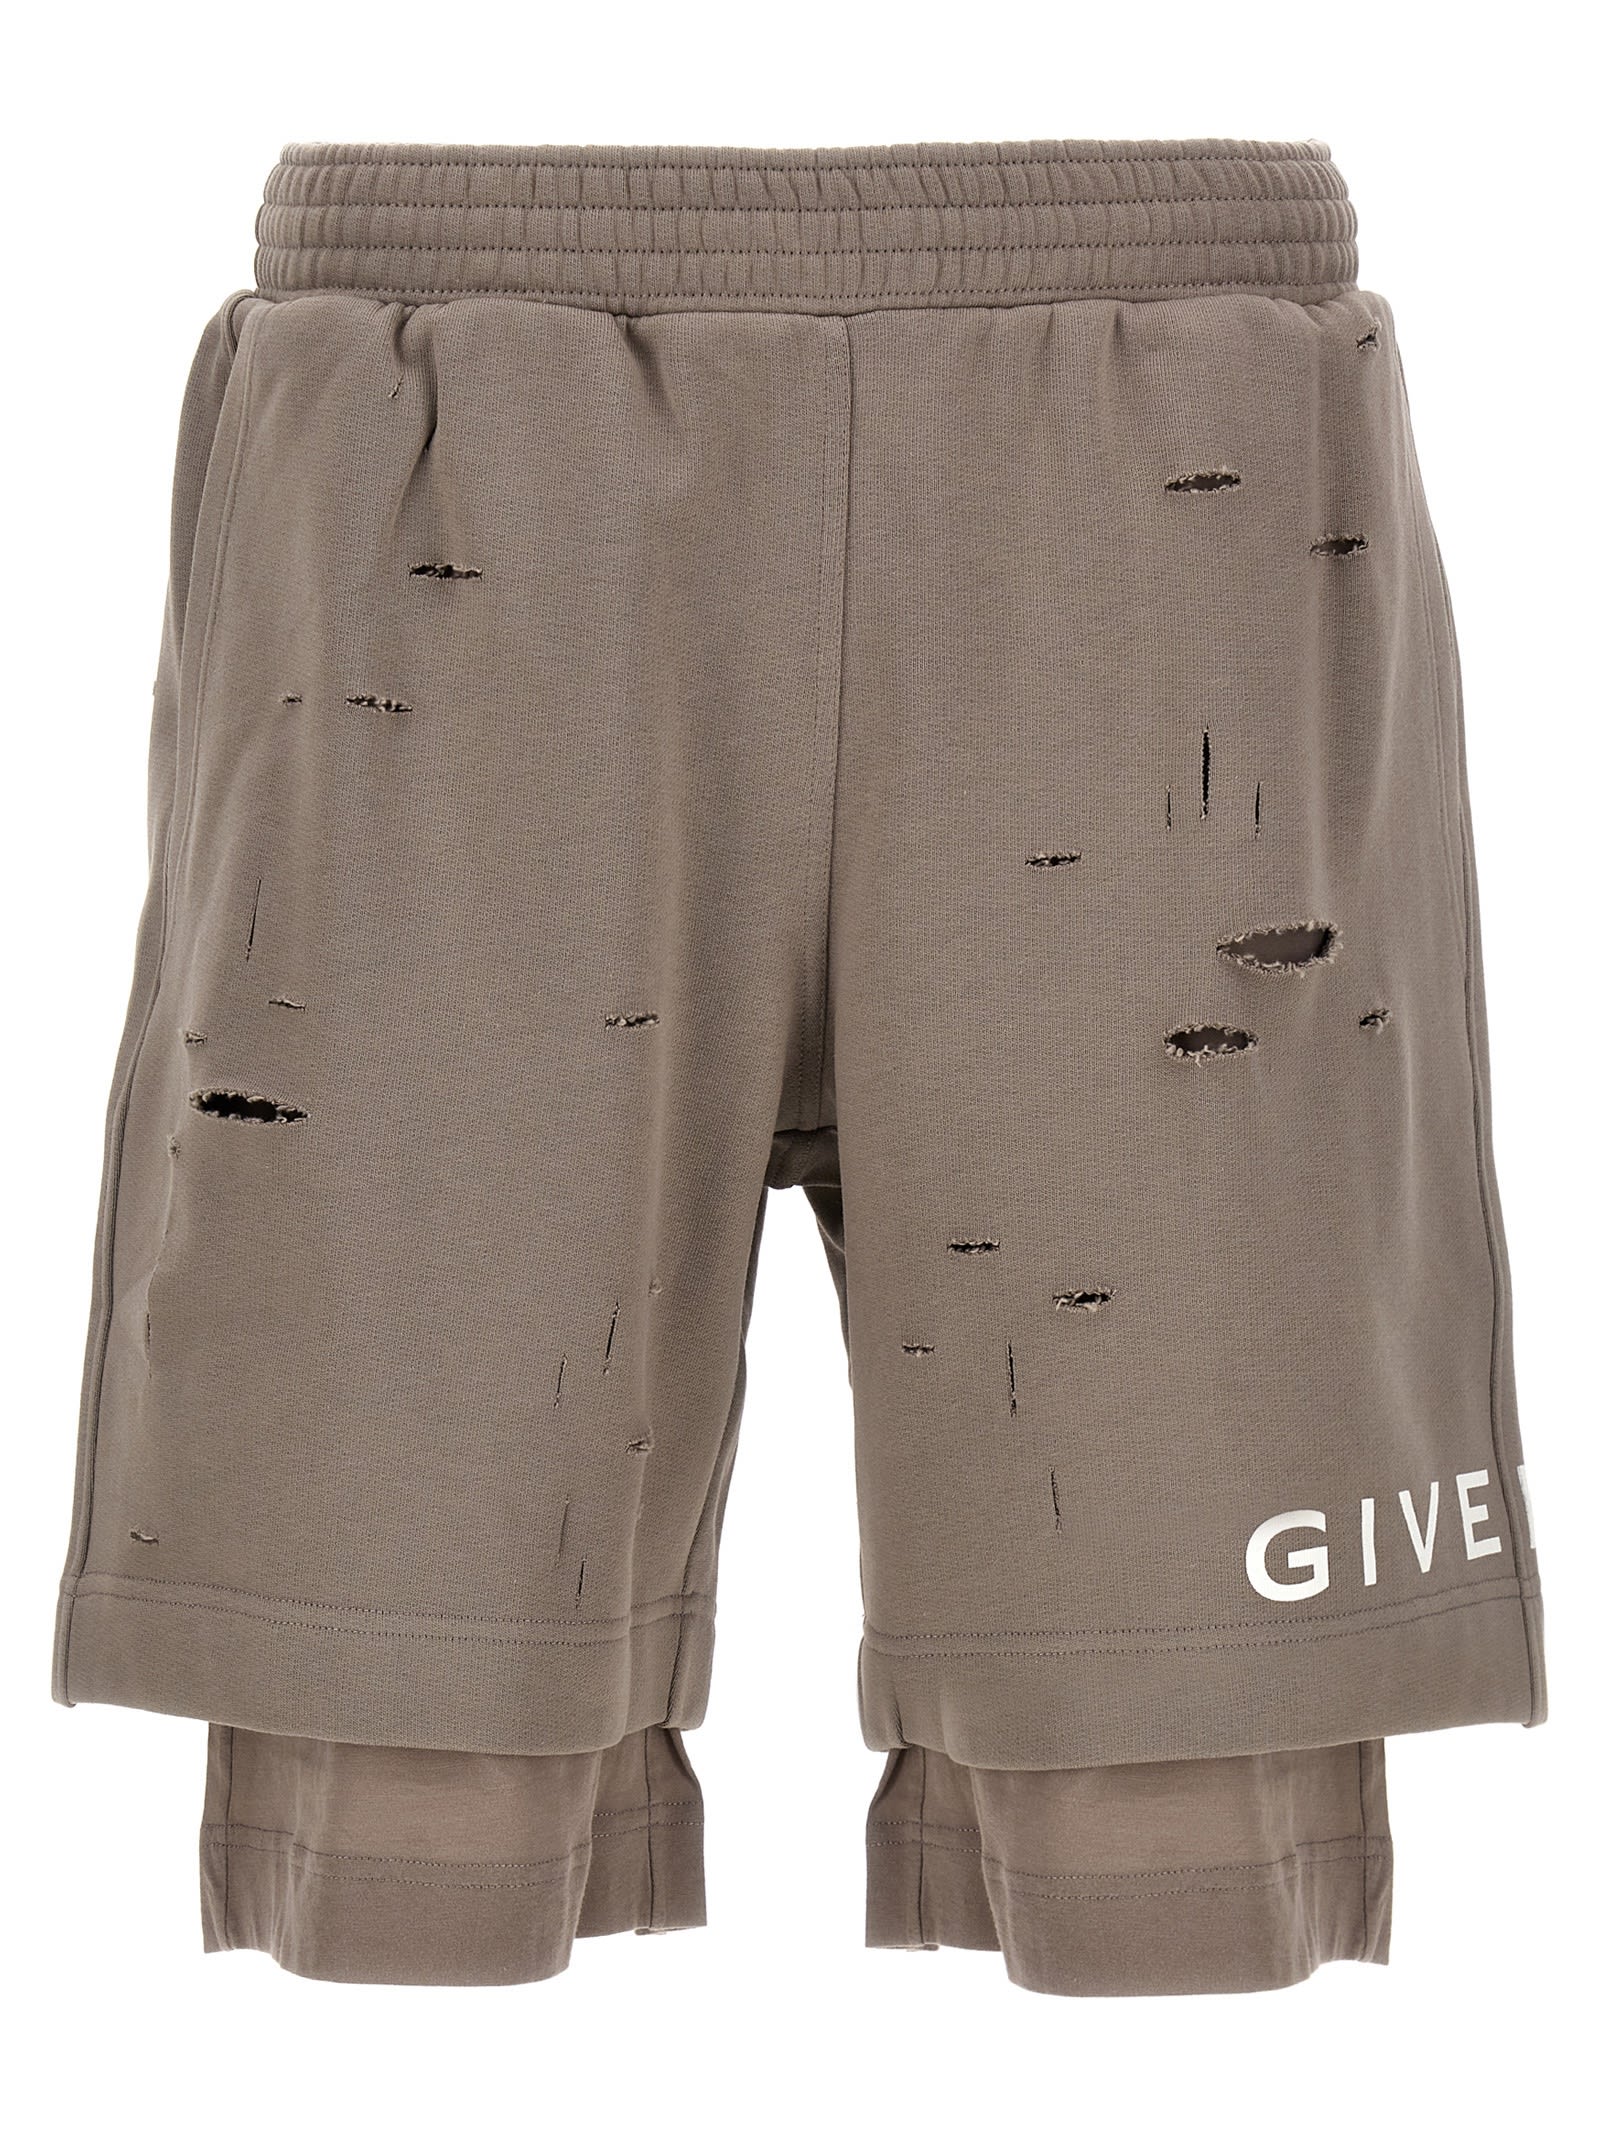 GIVENCHY DESTROYED EFFECT BERMUDA SHORTS